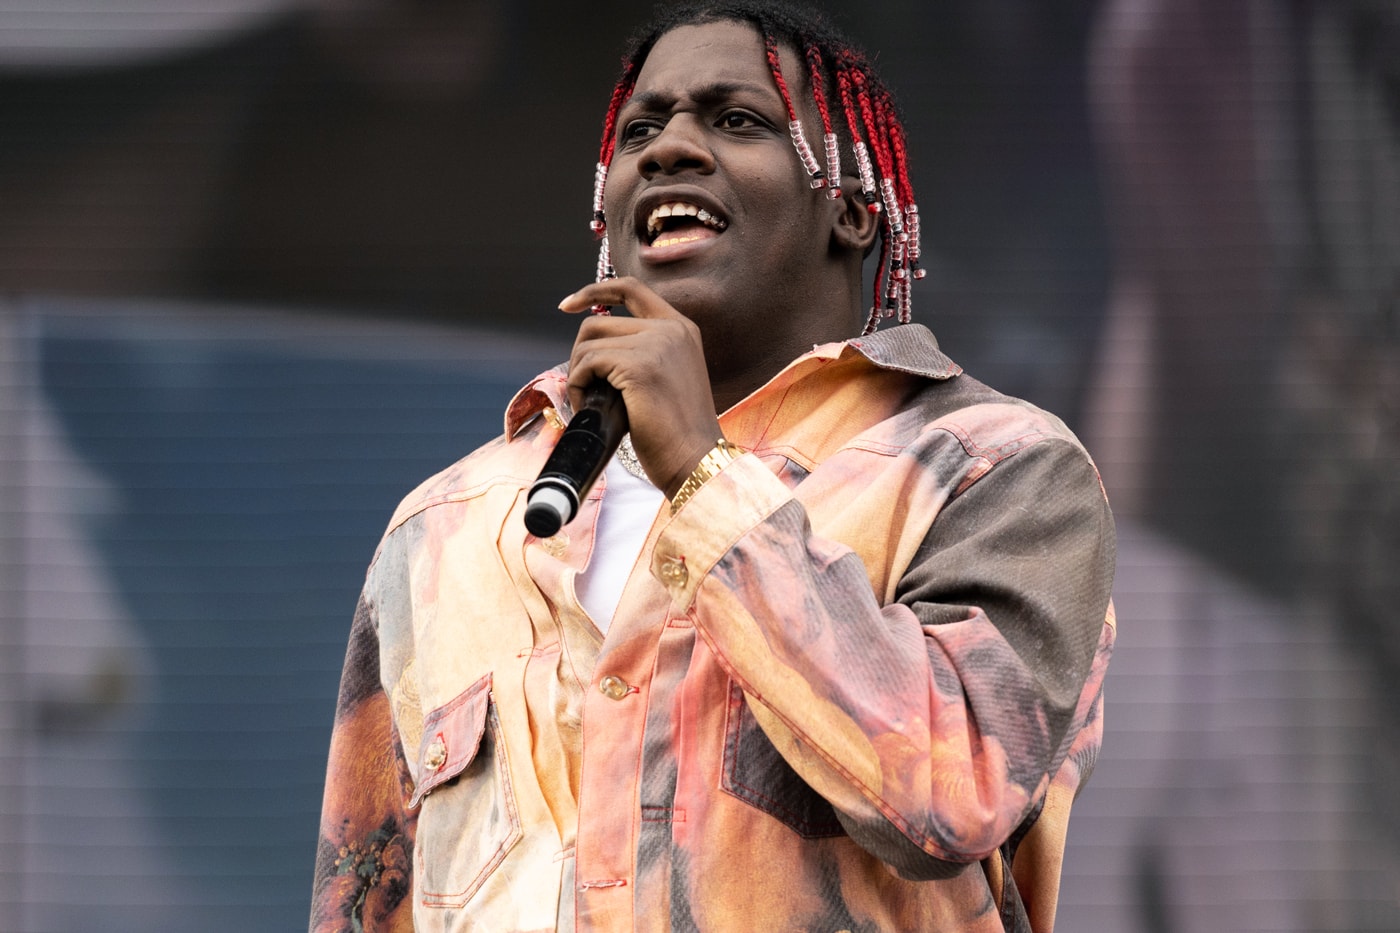 Lil Yachty Hops On Mike WiLL Made-It's New Song, "Hasselhoff"